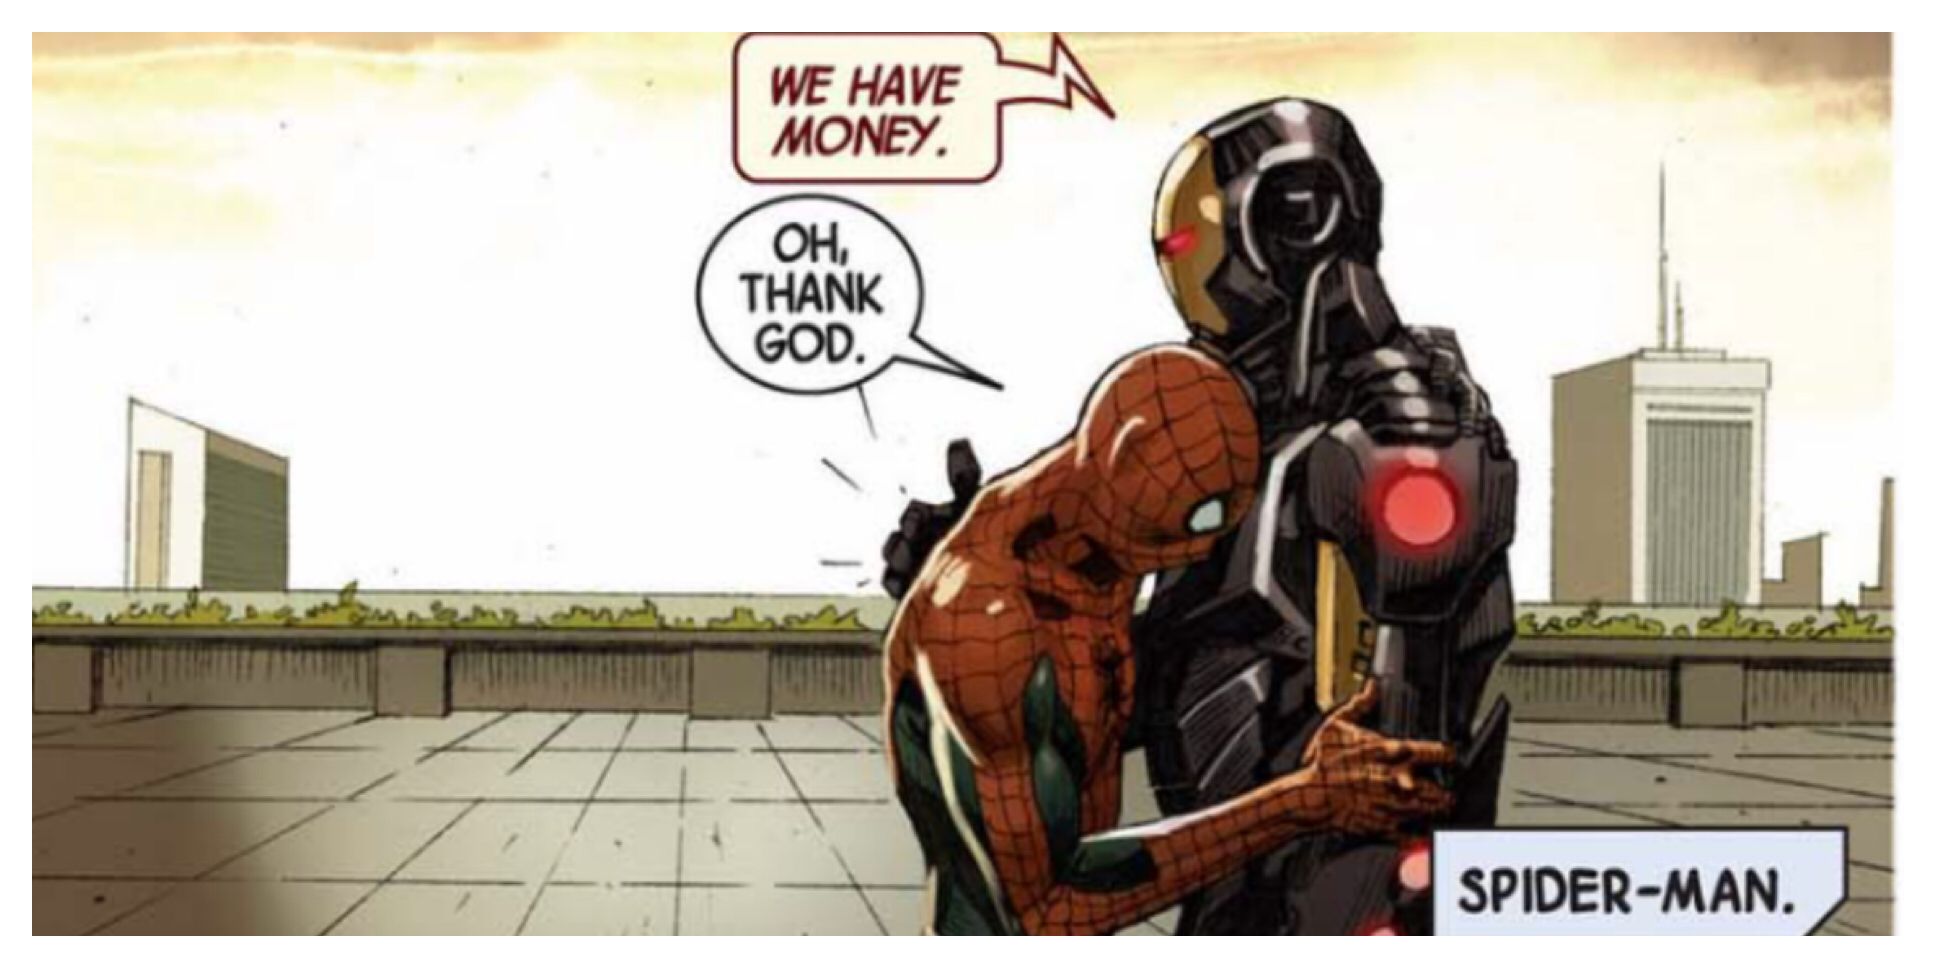 An image of Iron Man consoling Spider-Man, telling him the Avengers have money